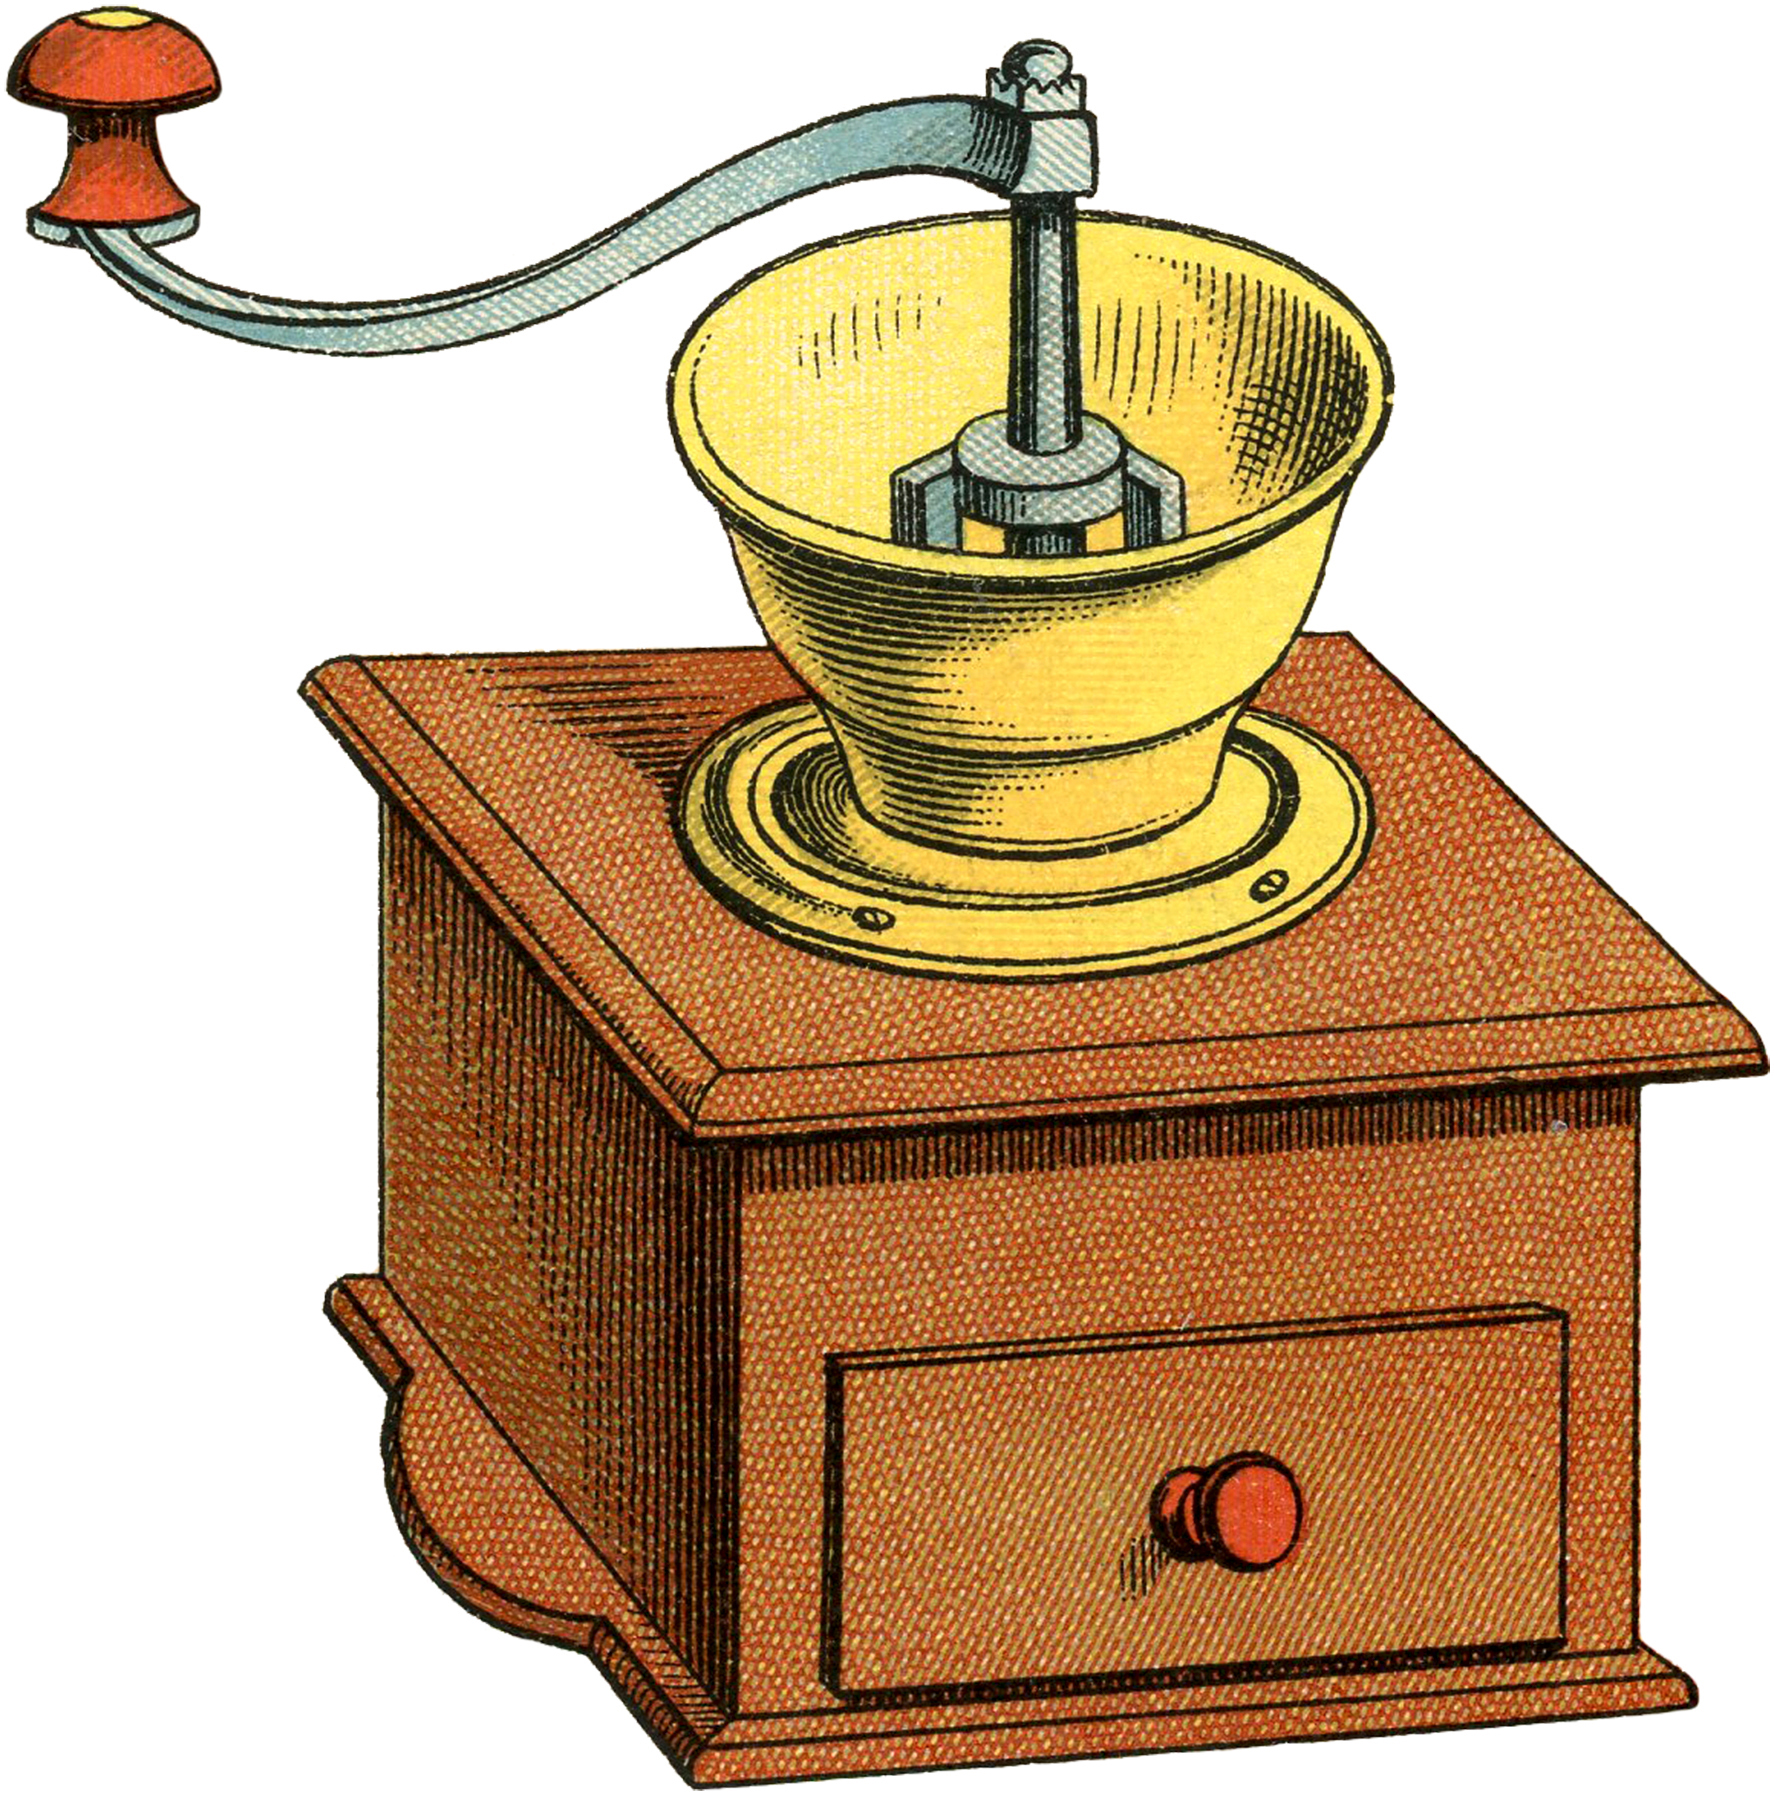 Coffee grinder clip art the graphics fairy